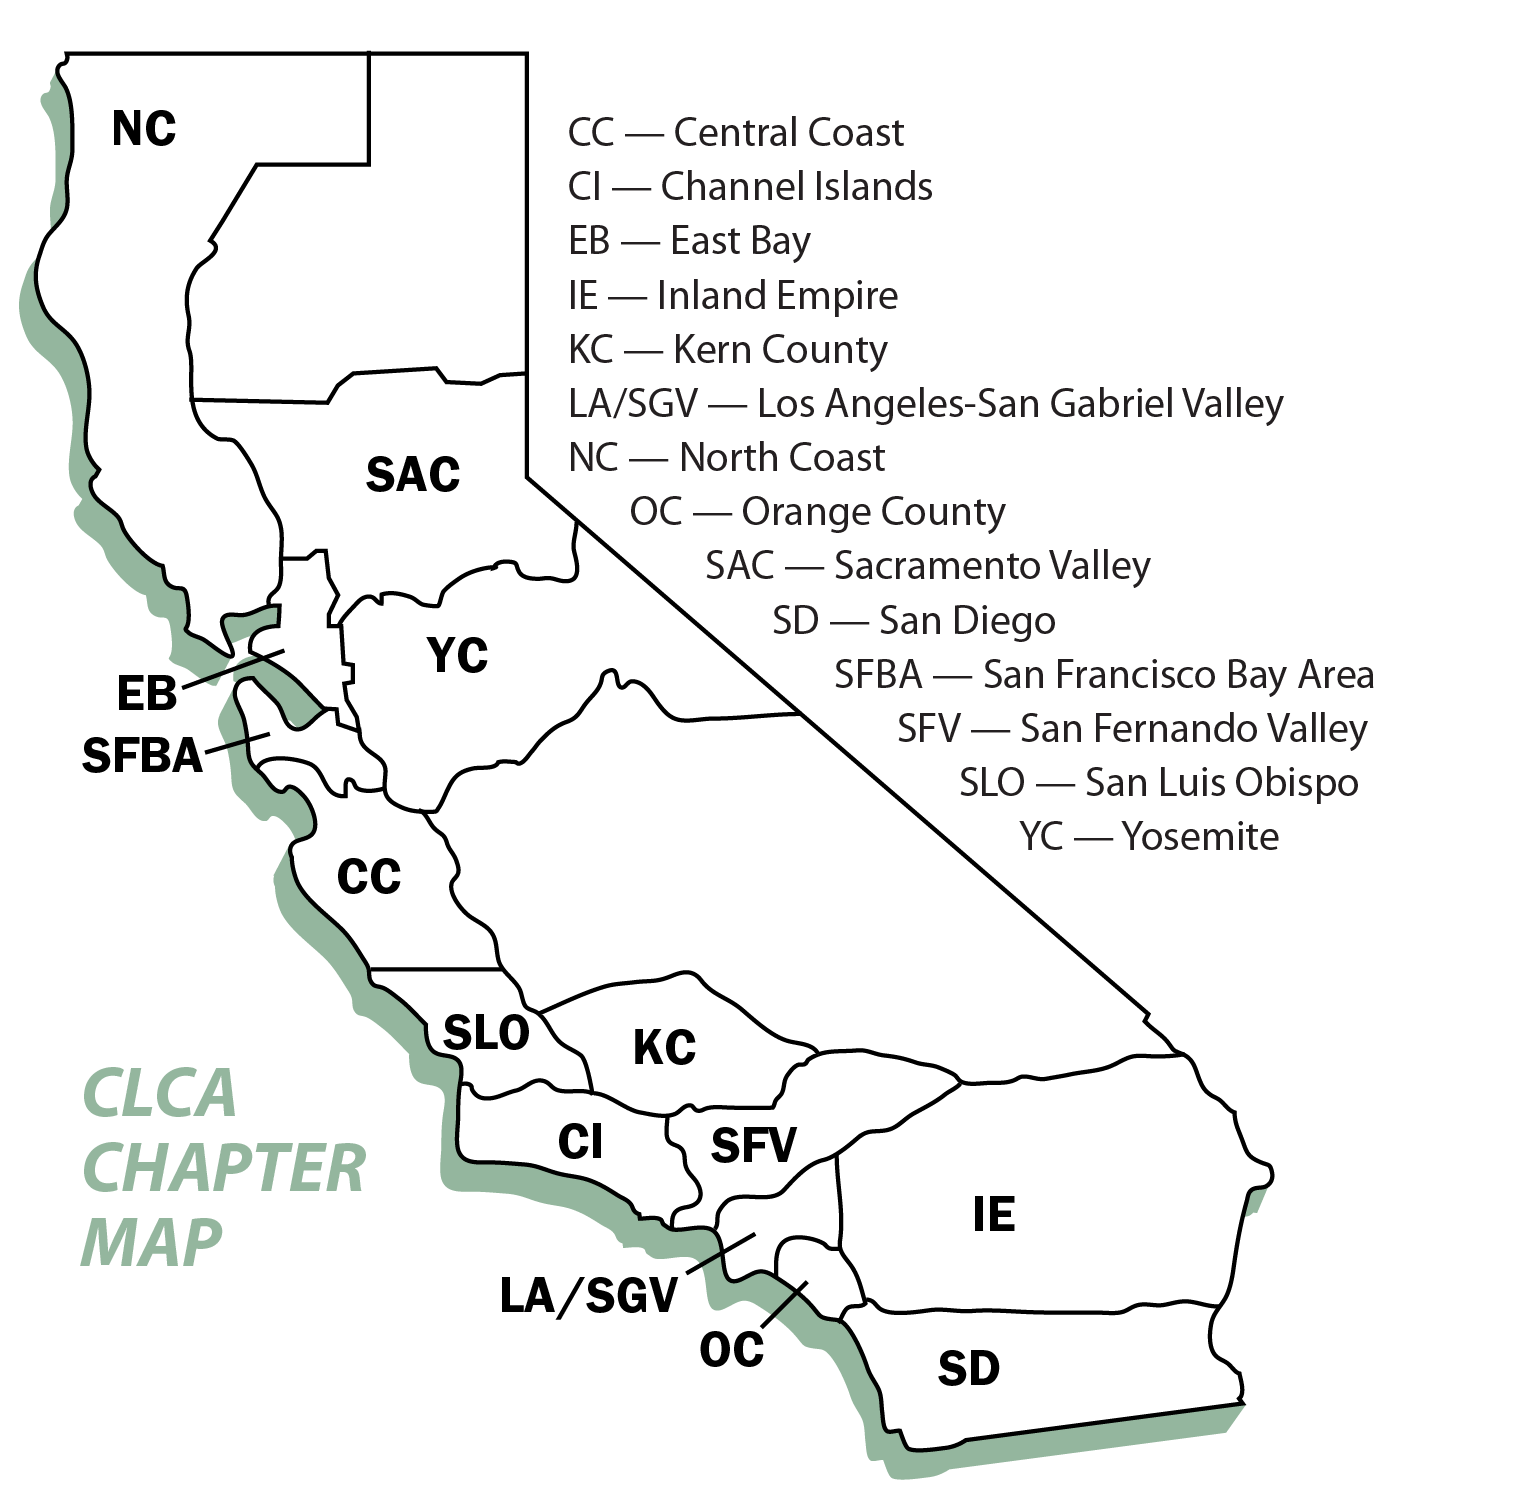 CLCA chapter map